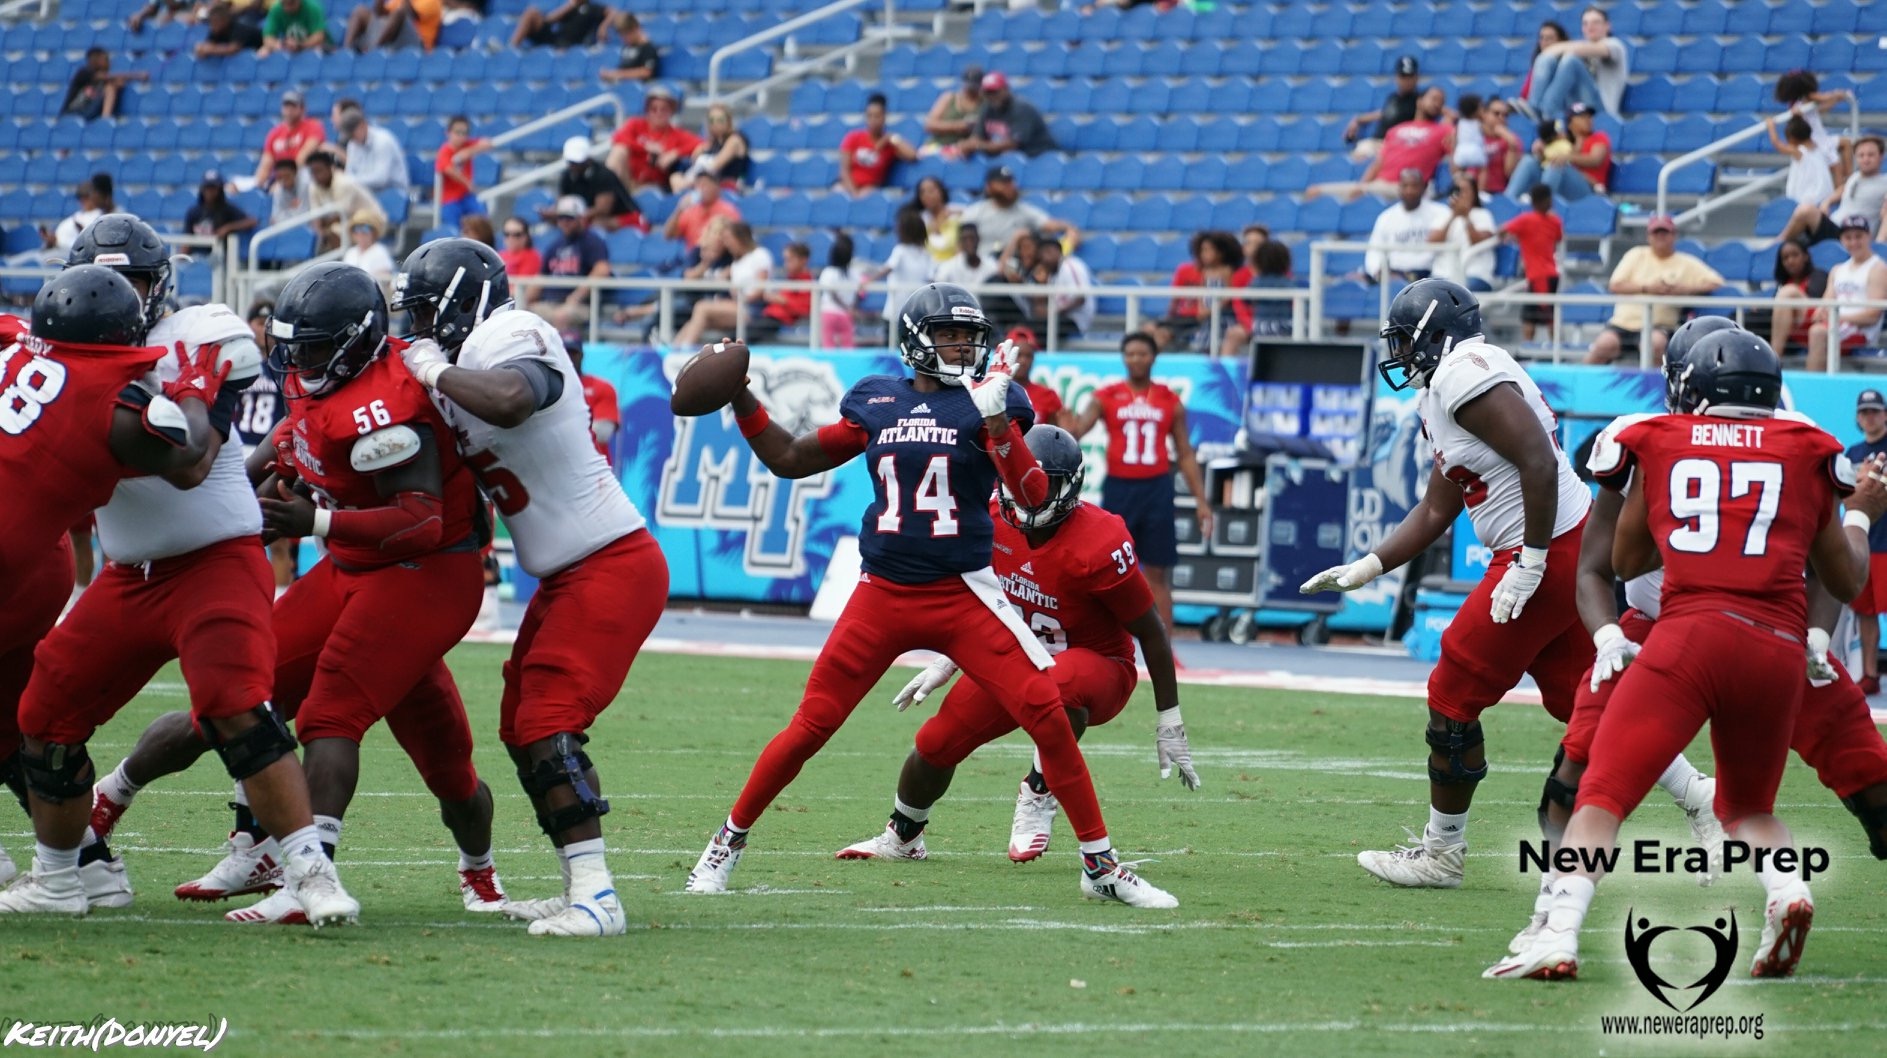 College Football Mixed results at FAU spring game New Era Prep